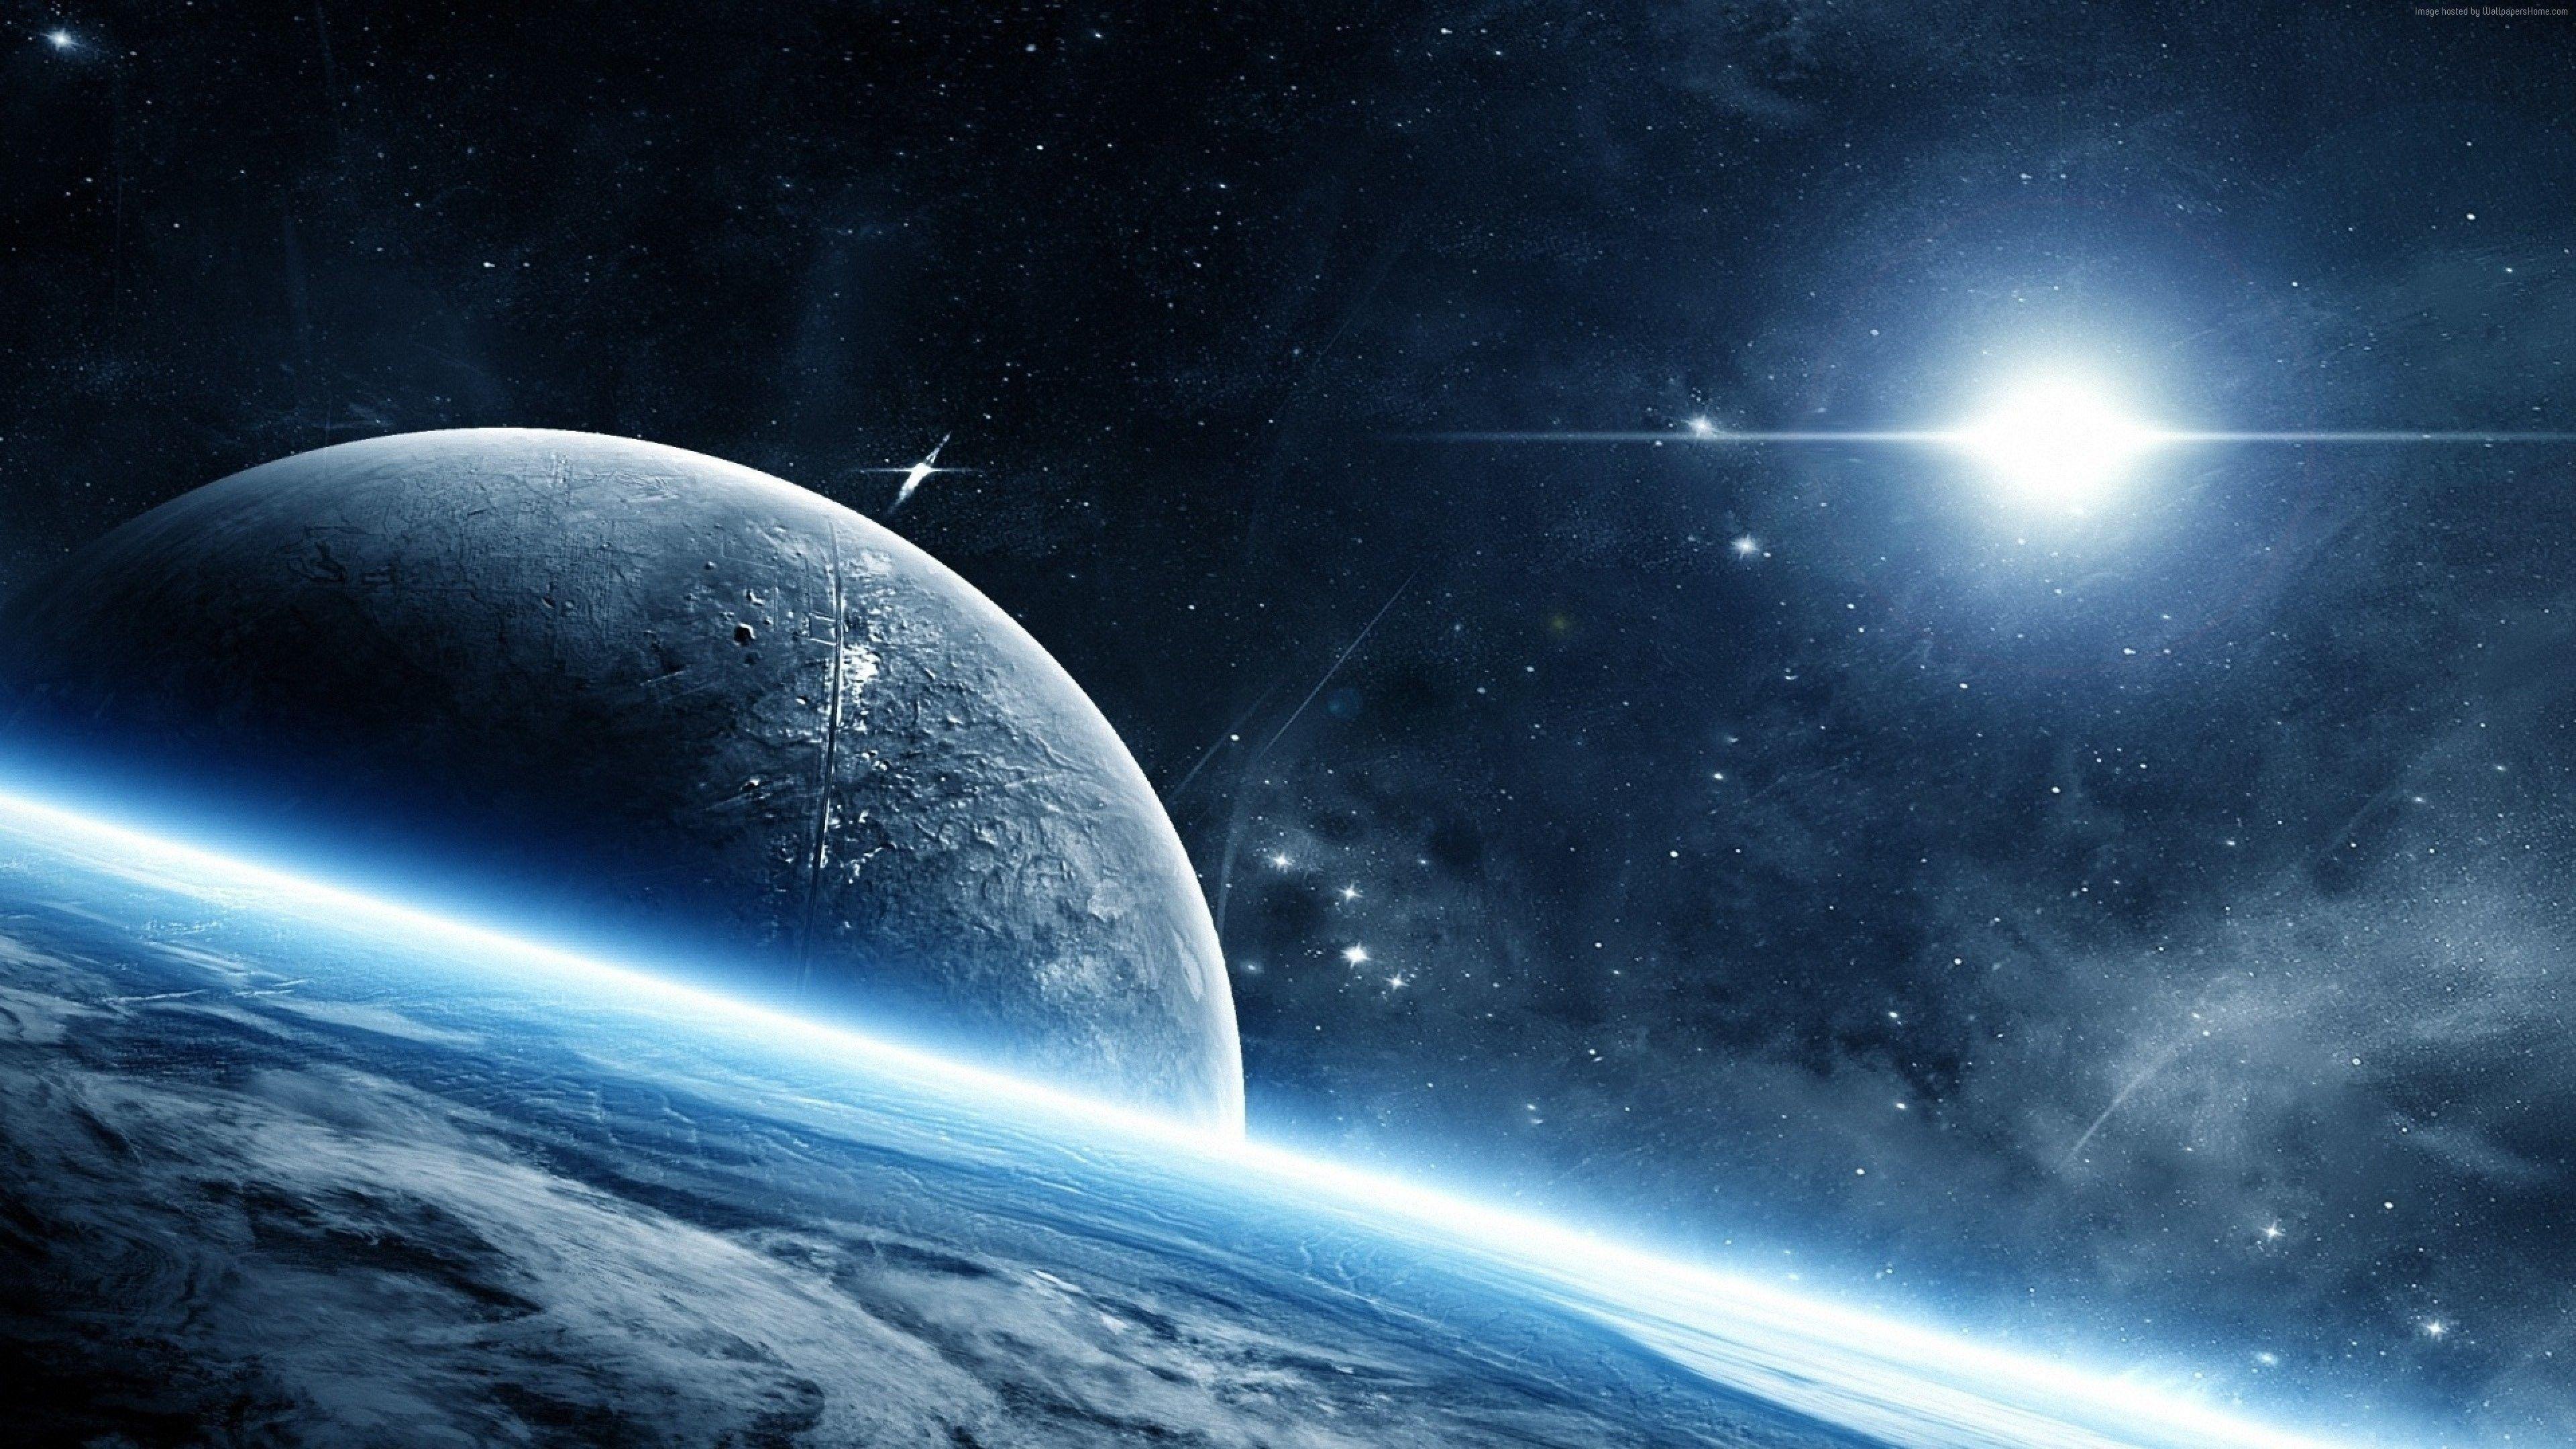 Space And Planets Wallpapers Top Free Space And Planets Backgrounds Wallpaperaccess 8826